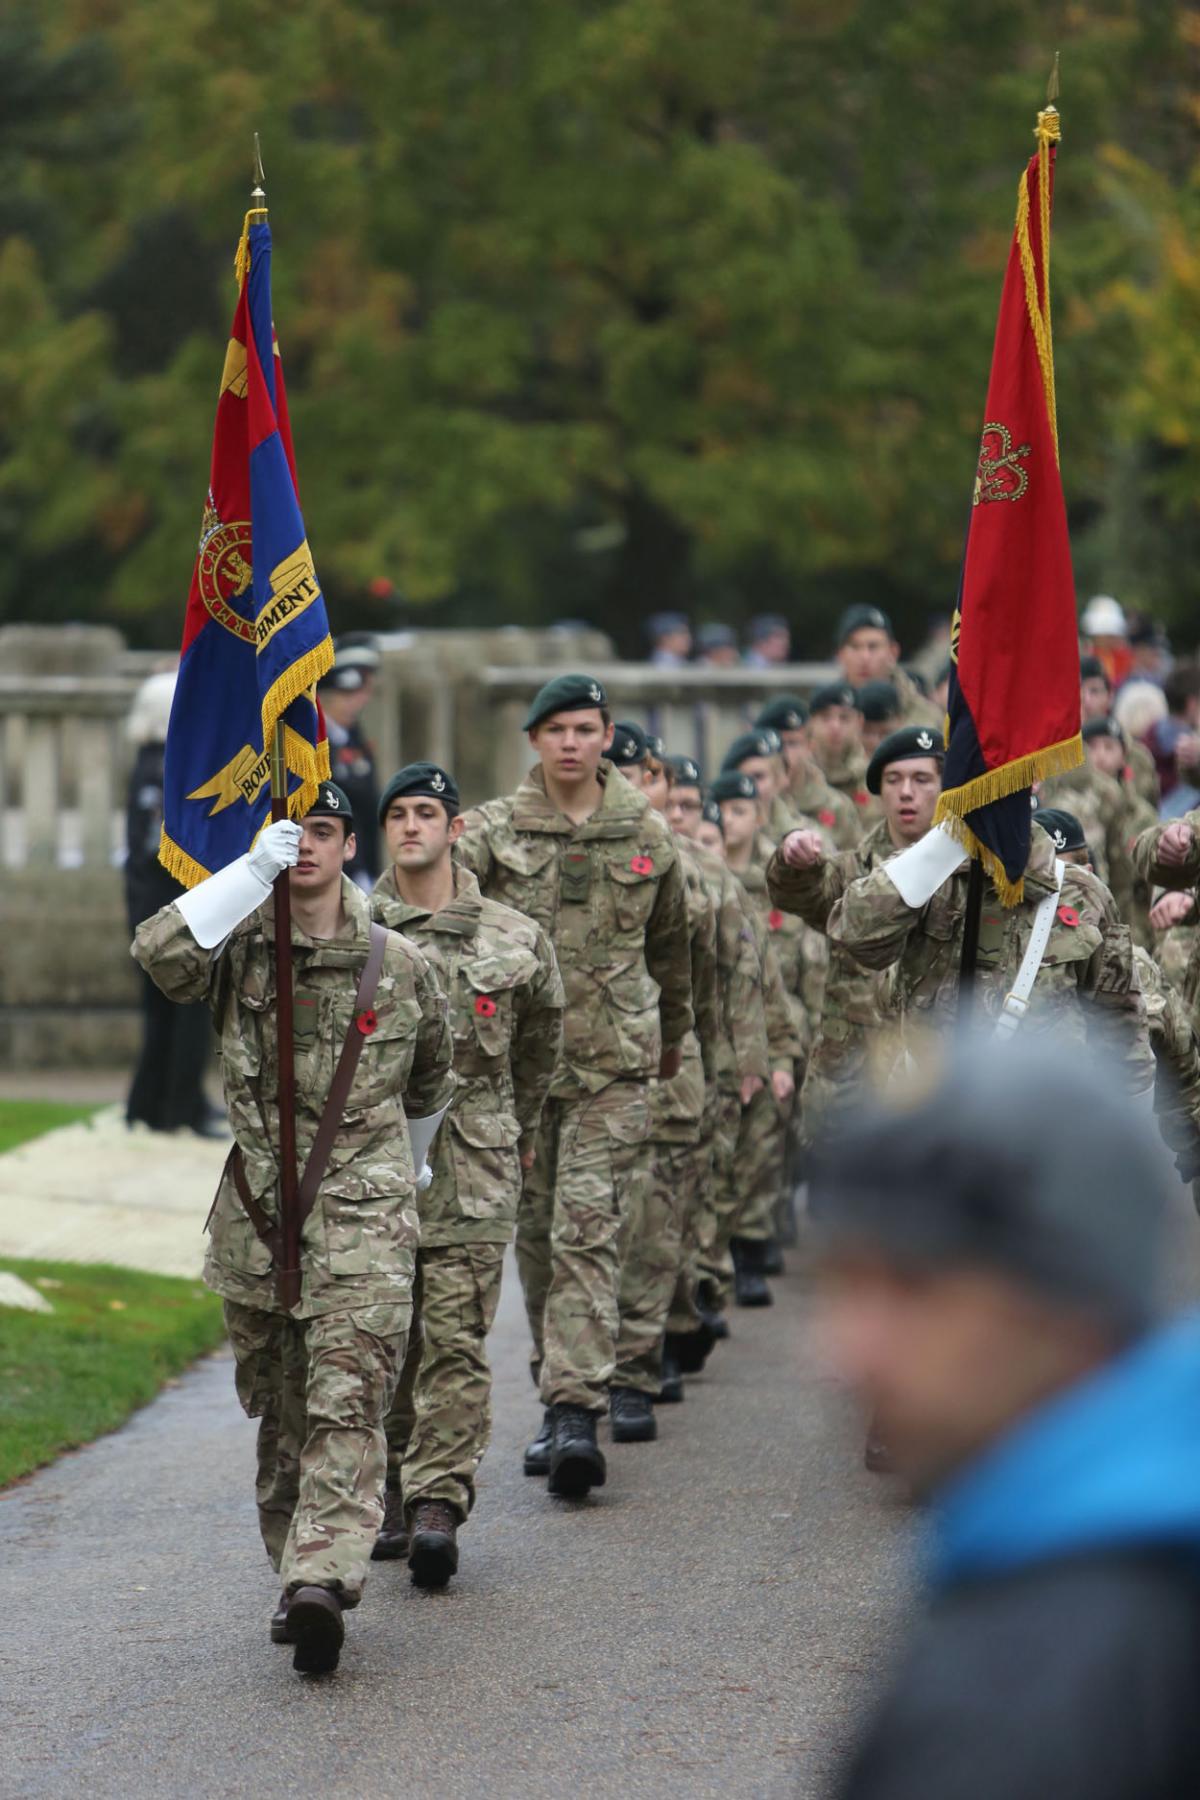 All the pictures from the Bournemouth Remembrance Day Parade 2015